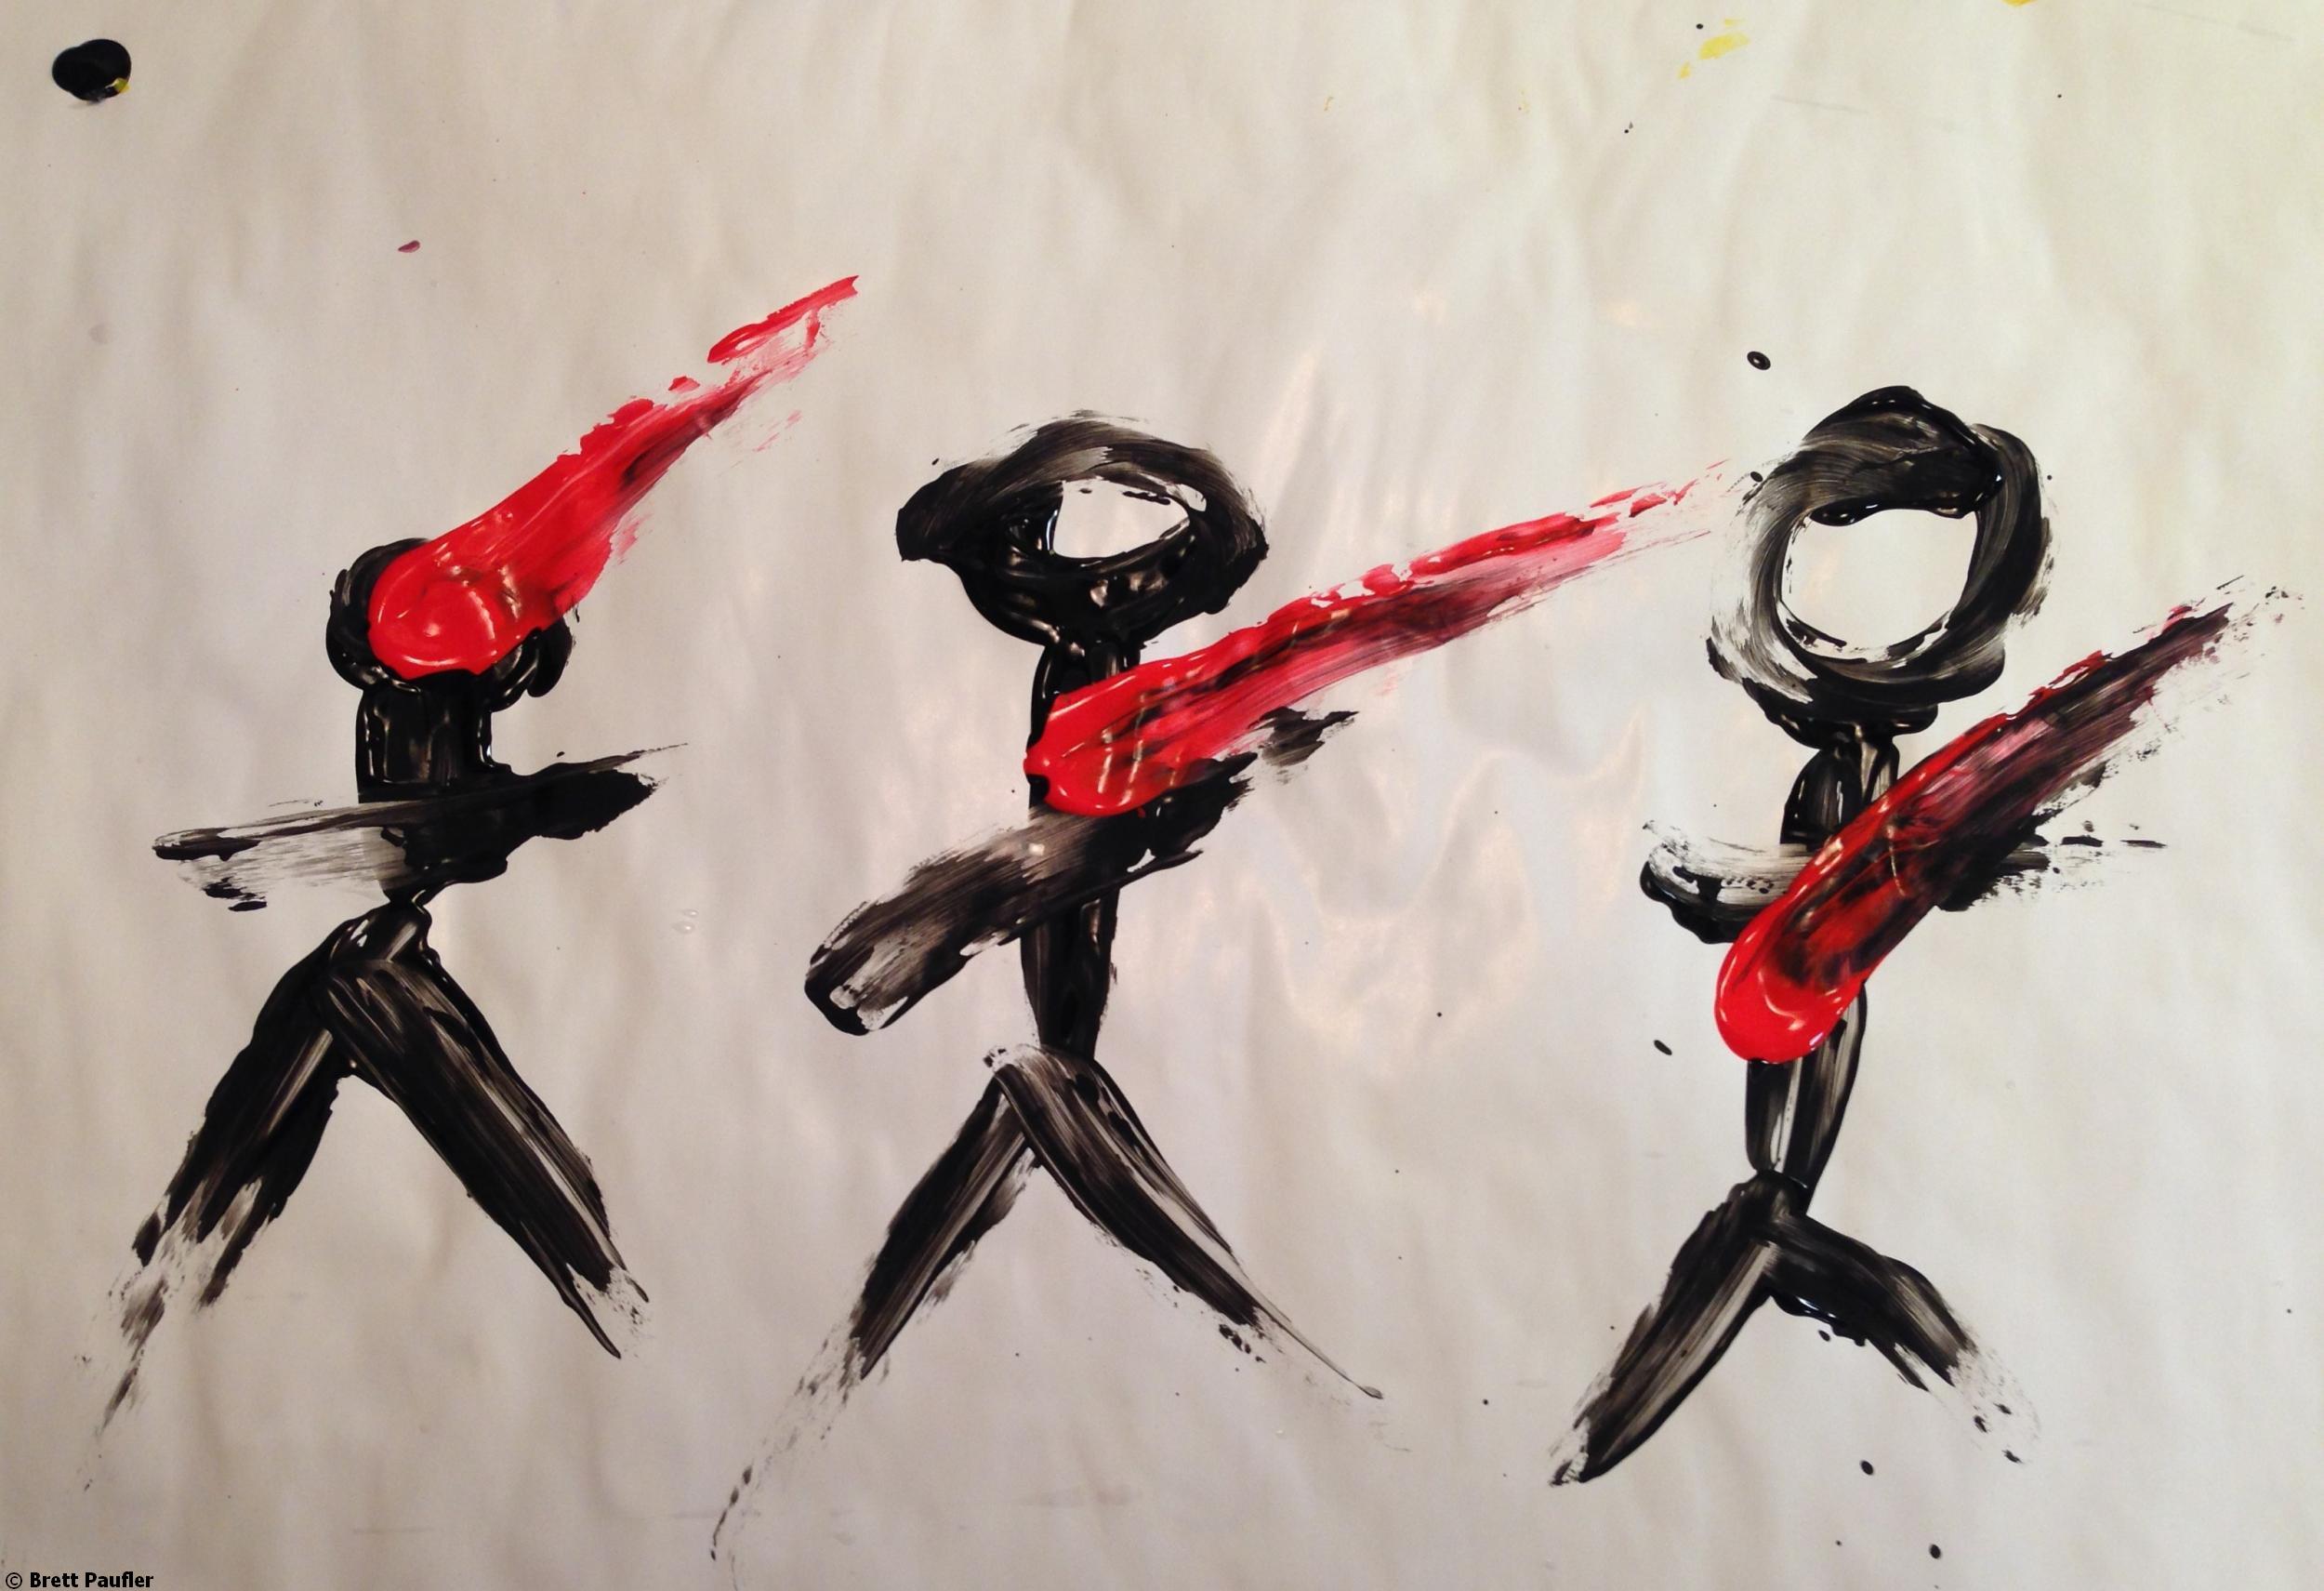 Black Stick Figures with a Red Blot of Brush over each, all of the images are very amateurish finger paints, which does not mean they do not look cool, just that the technique is very much your basid finger paint